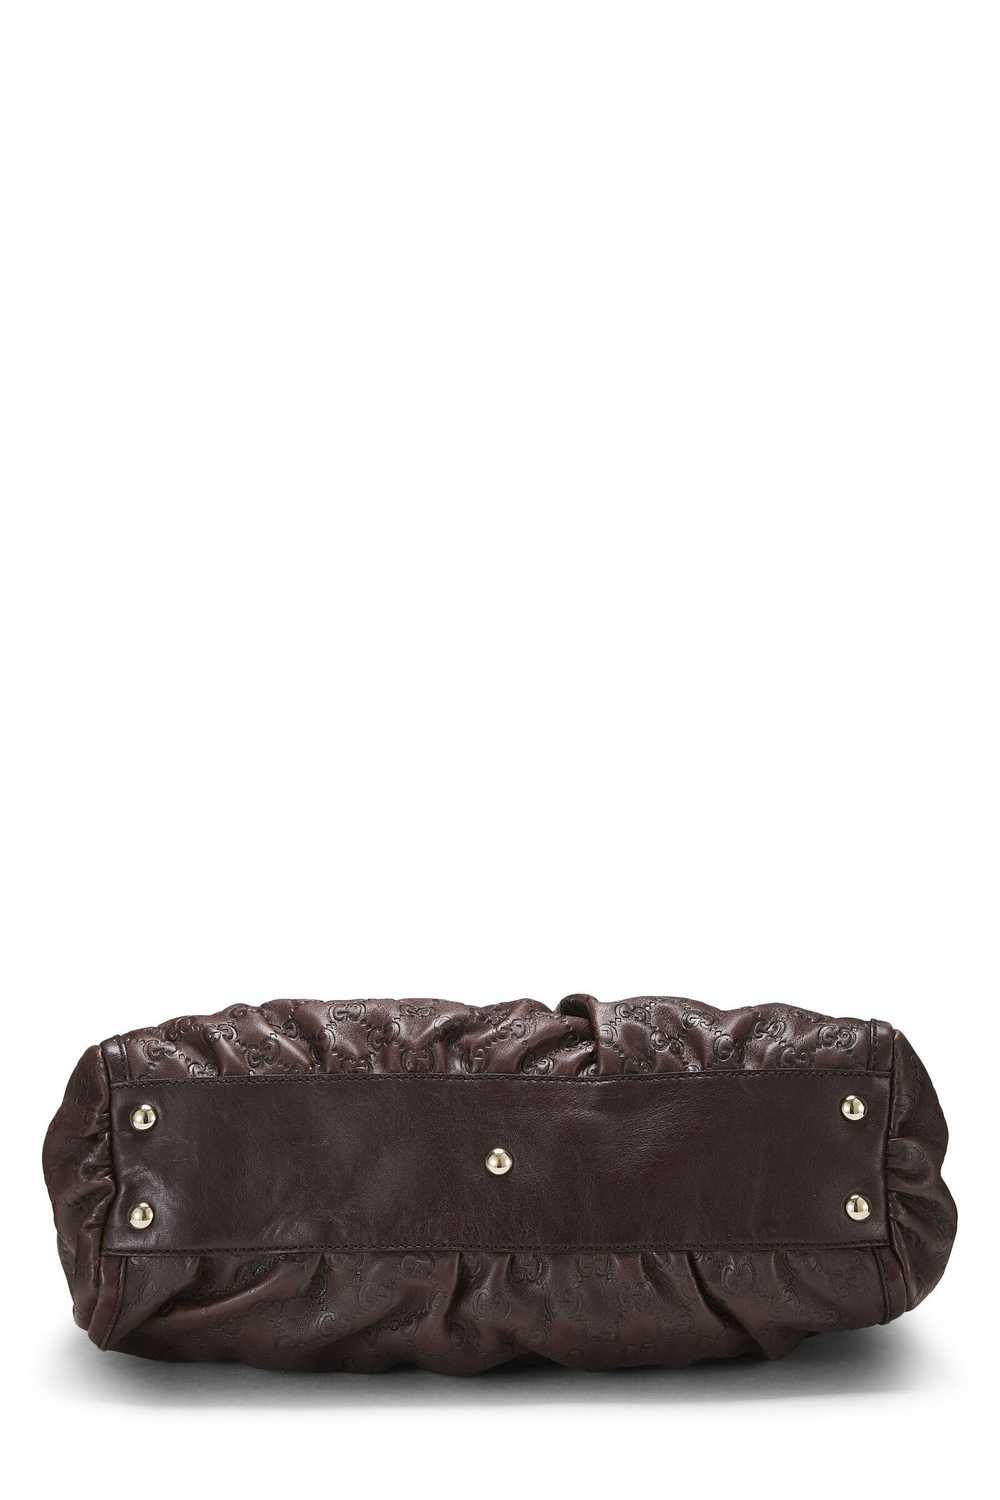 Brown Guccissima D-Ring Abbey Zip Tote - image 5